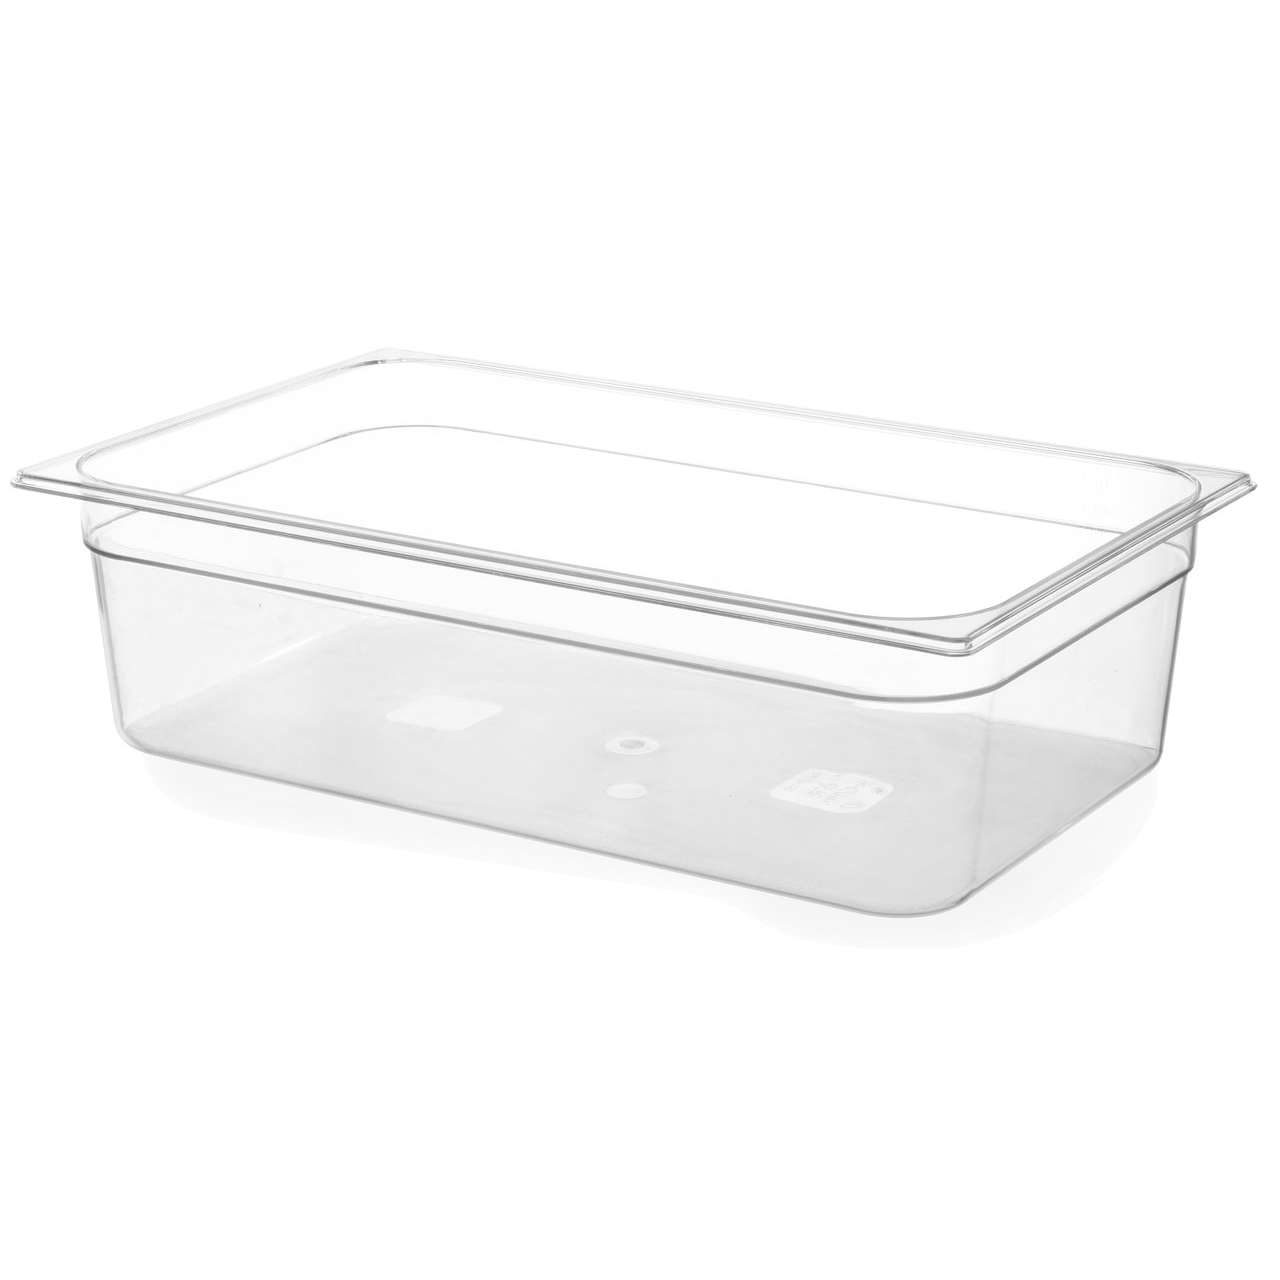 Ziva Xlarge sous-vide container